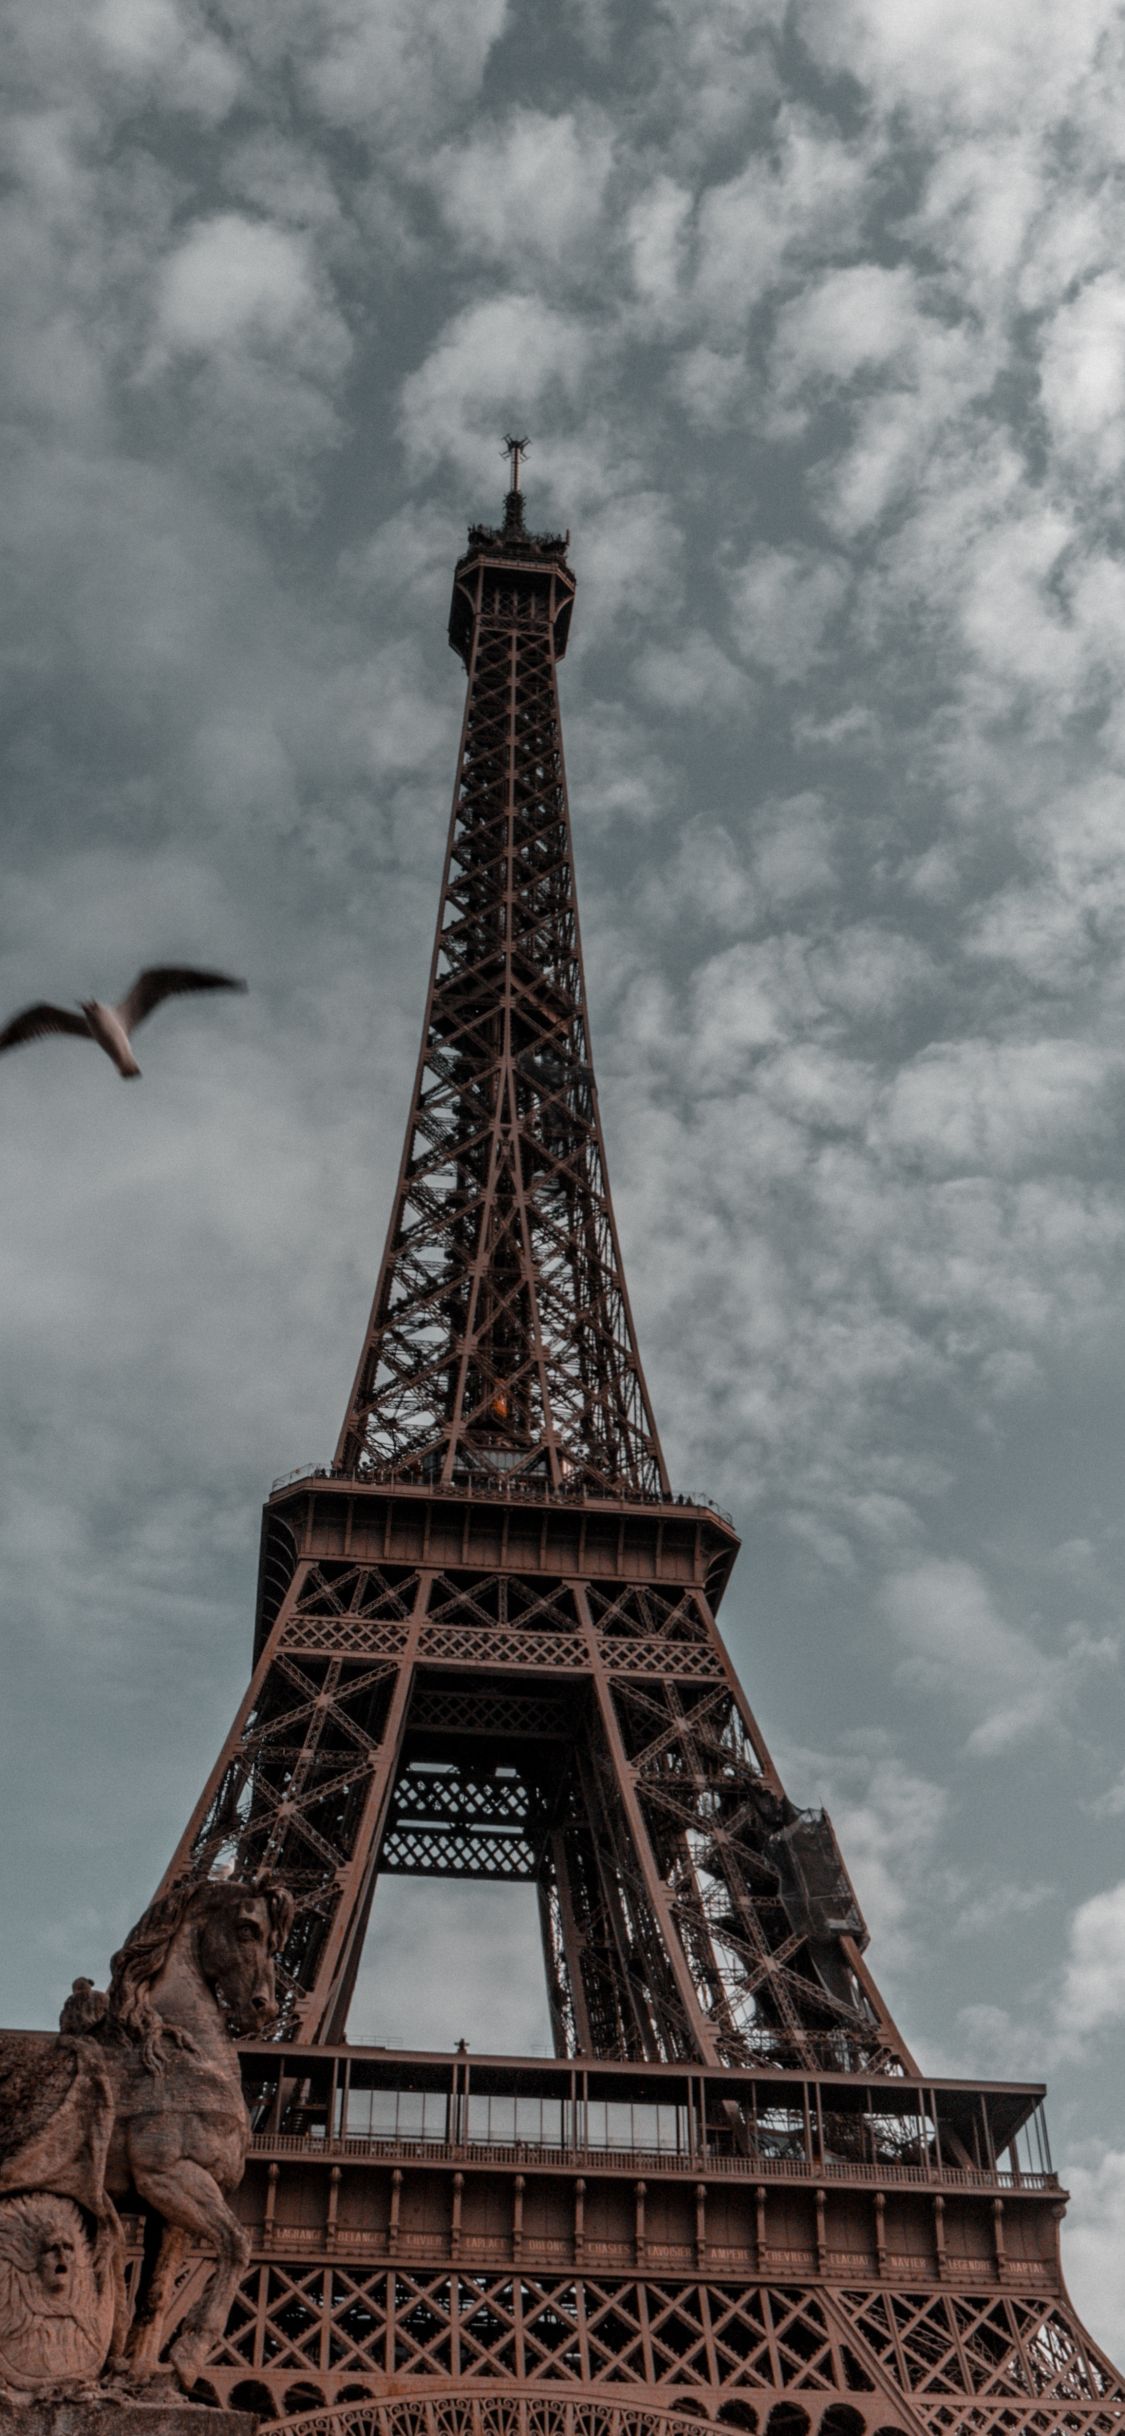 Download 1125x2436 wallpapers eiffel tower, paris, sky, architecture, iphone x 1125x2436 hd image, background, 7183